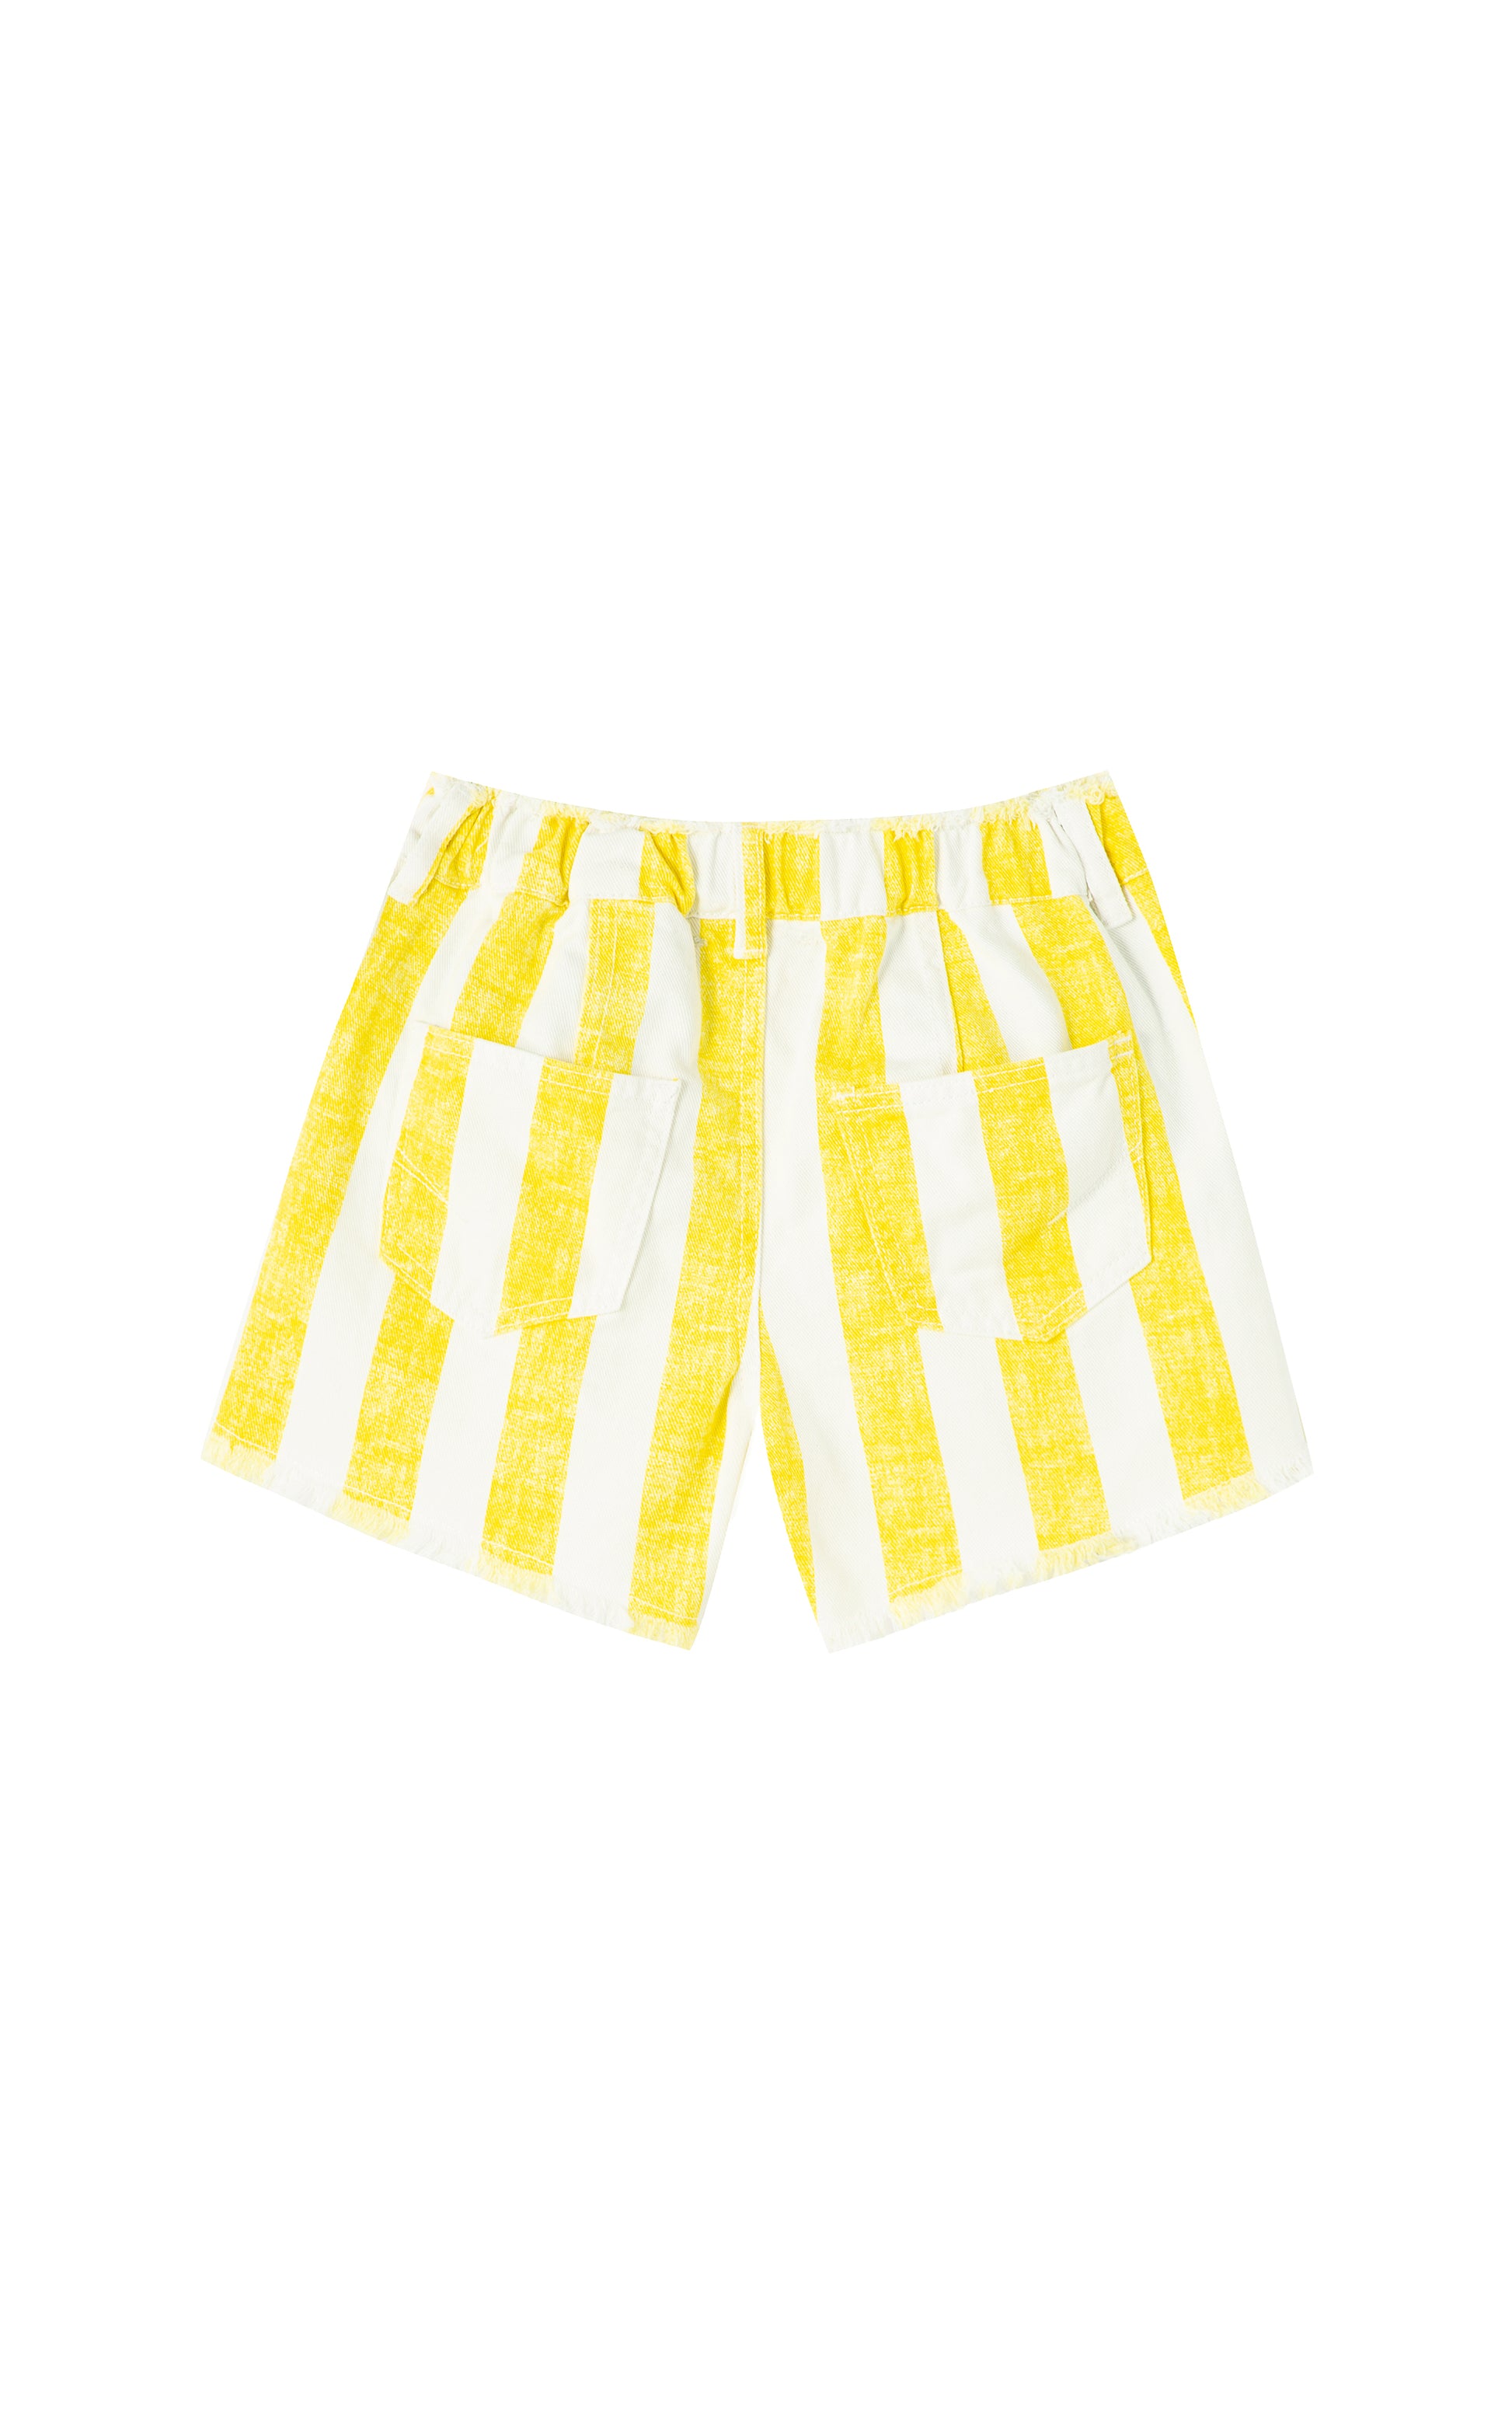 Back view of yellow linen shorts with white stripes and lace detailing 